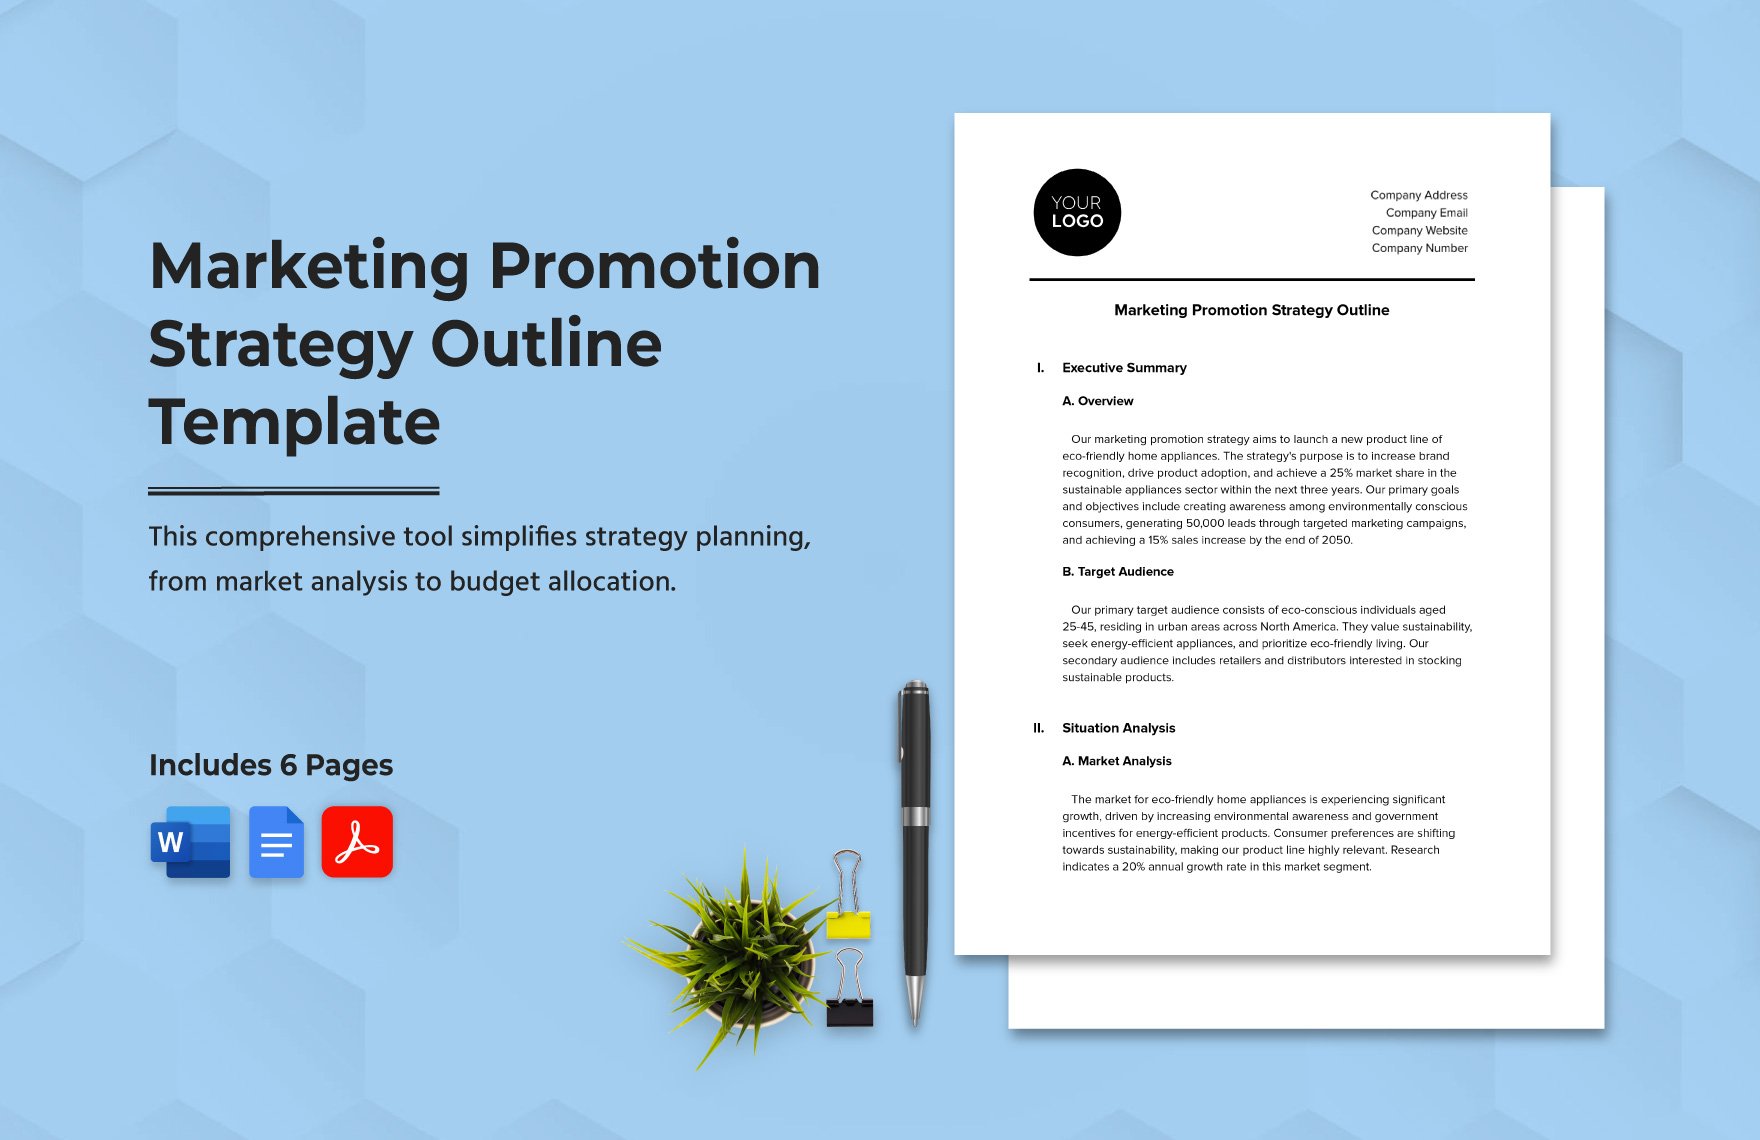 Marketing Promotion Strategy Outline Template in Word, Google Docs, PDF